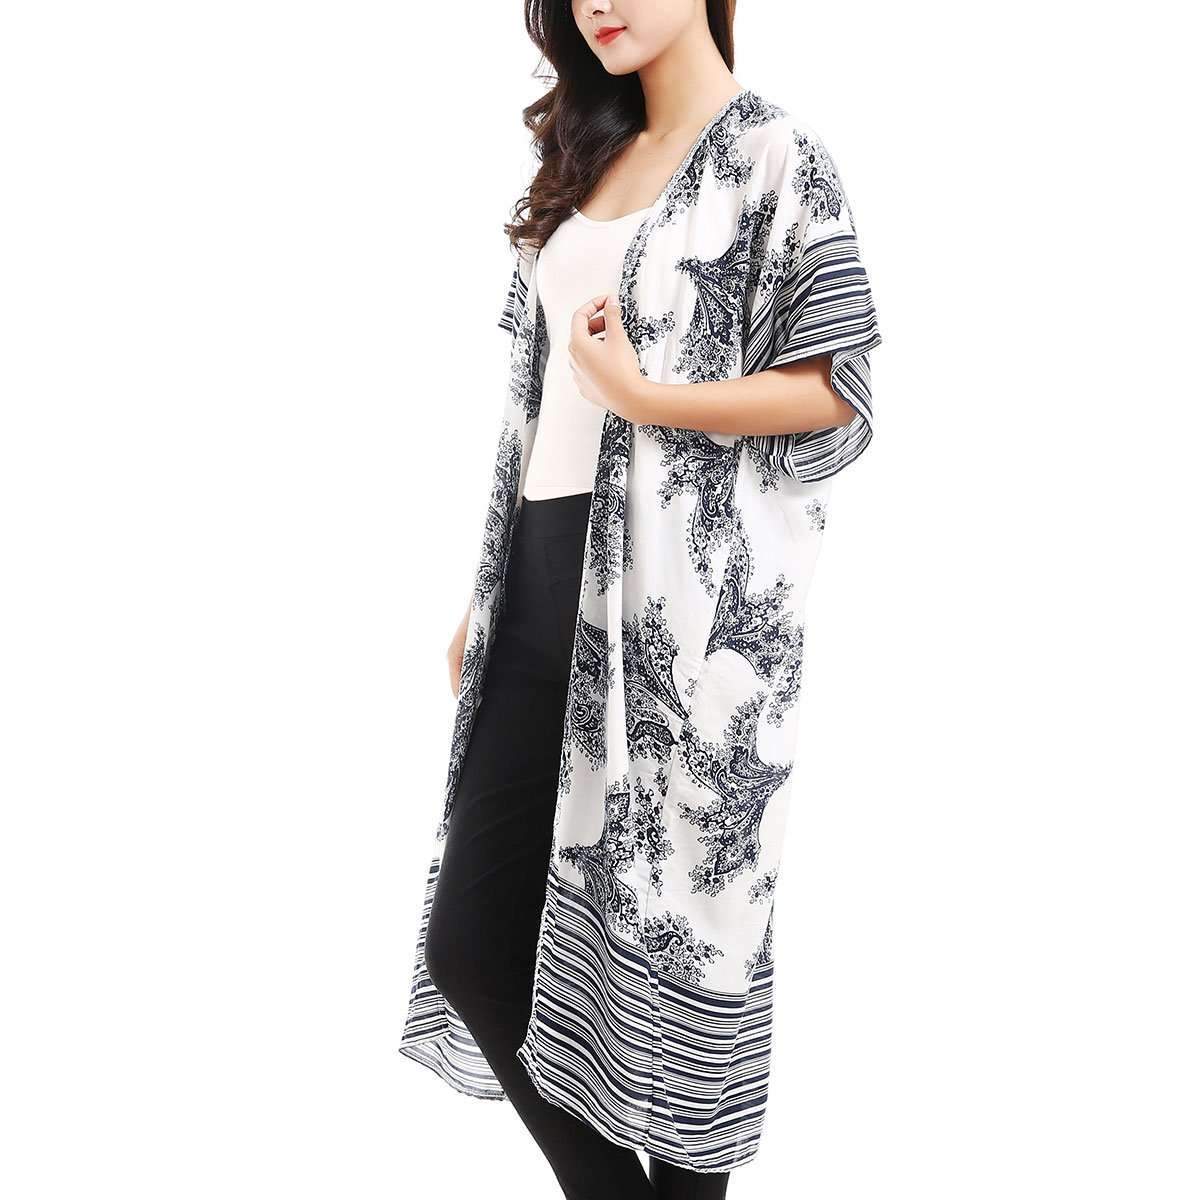 MonoChrome Kimono,Outerwear,Mad Style, by Mad Style